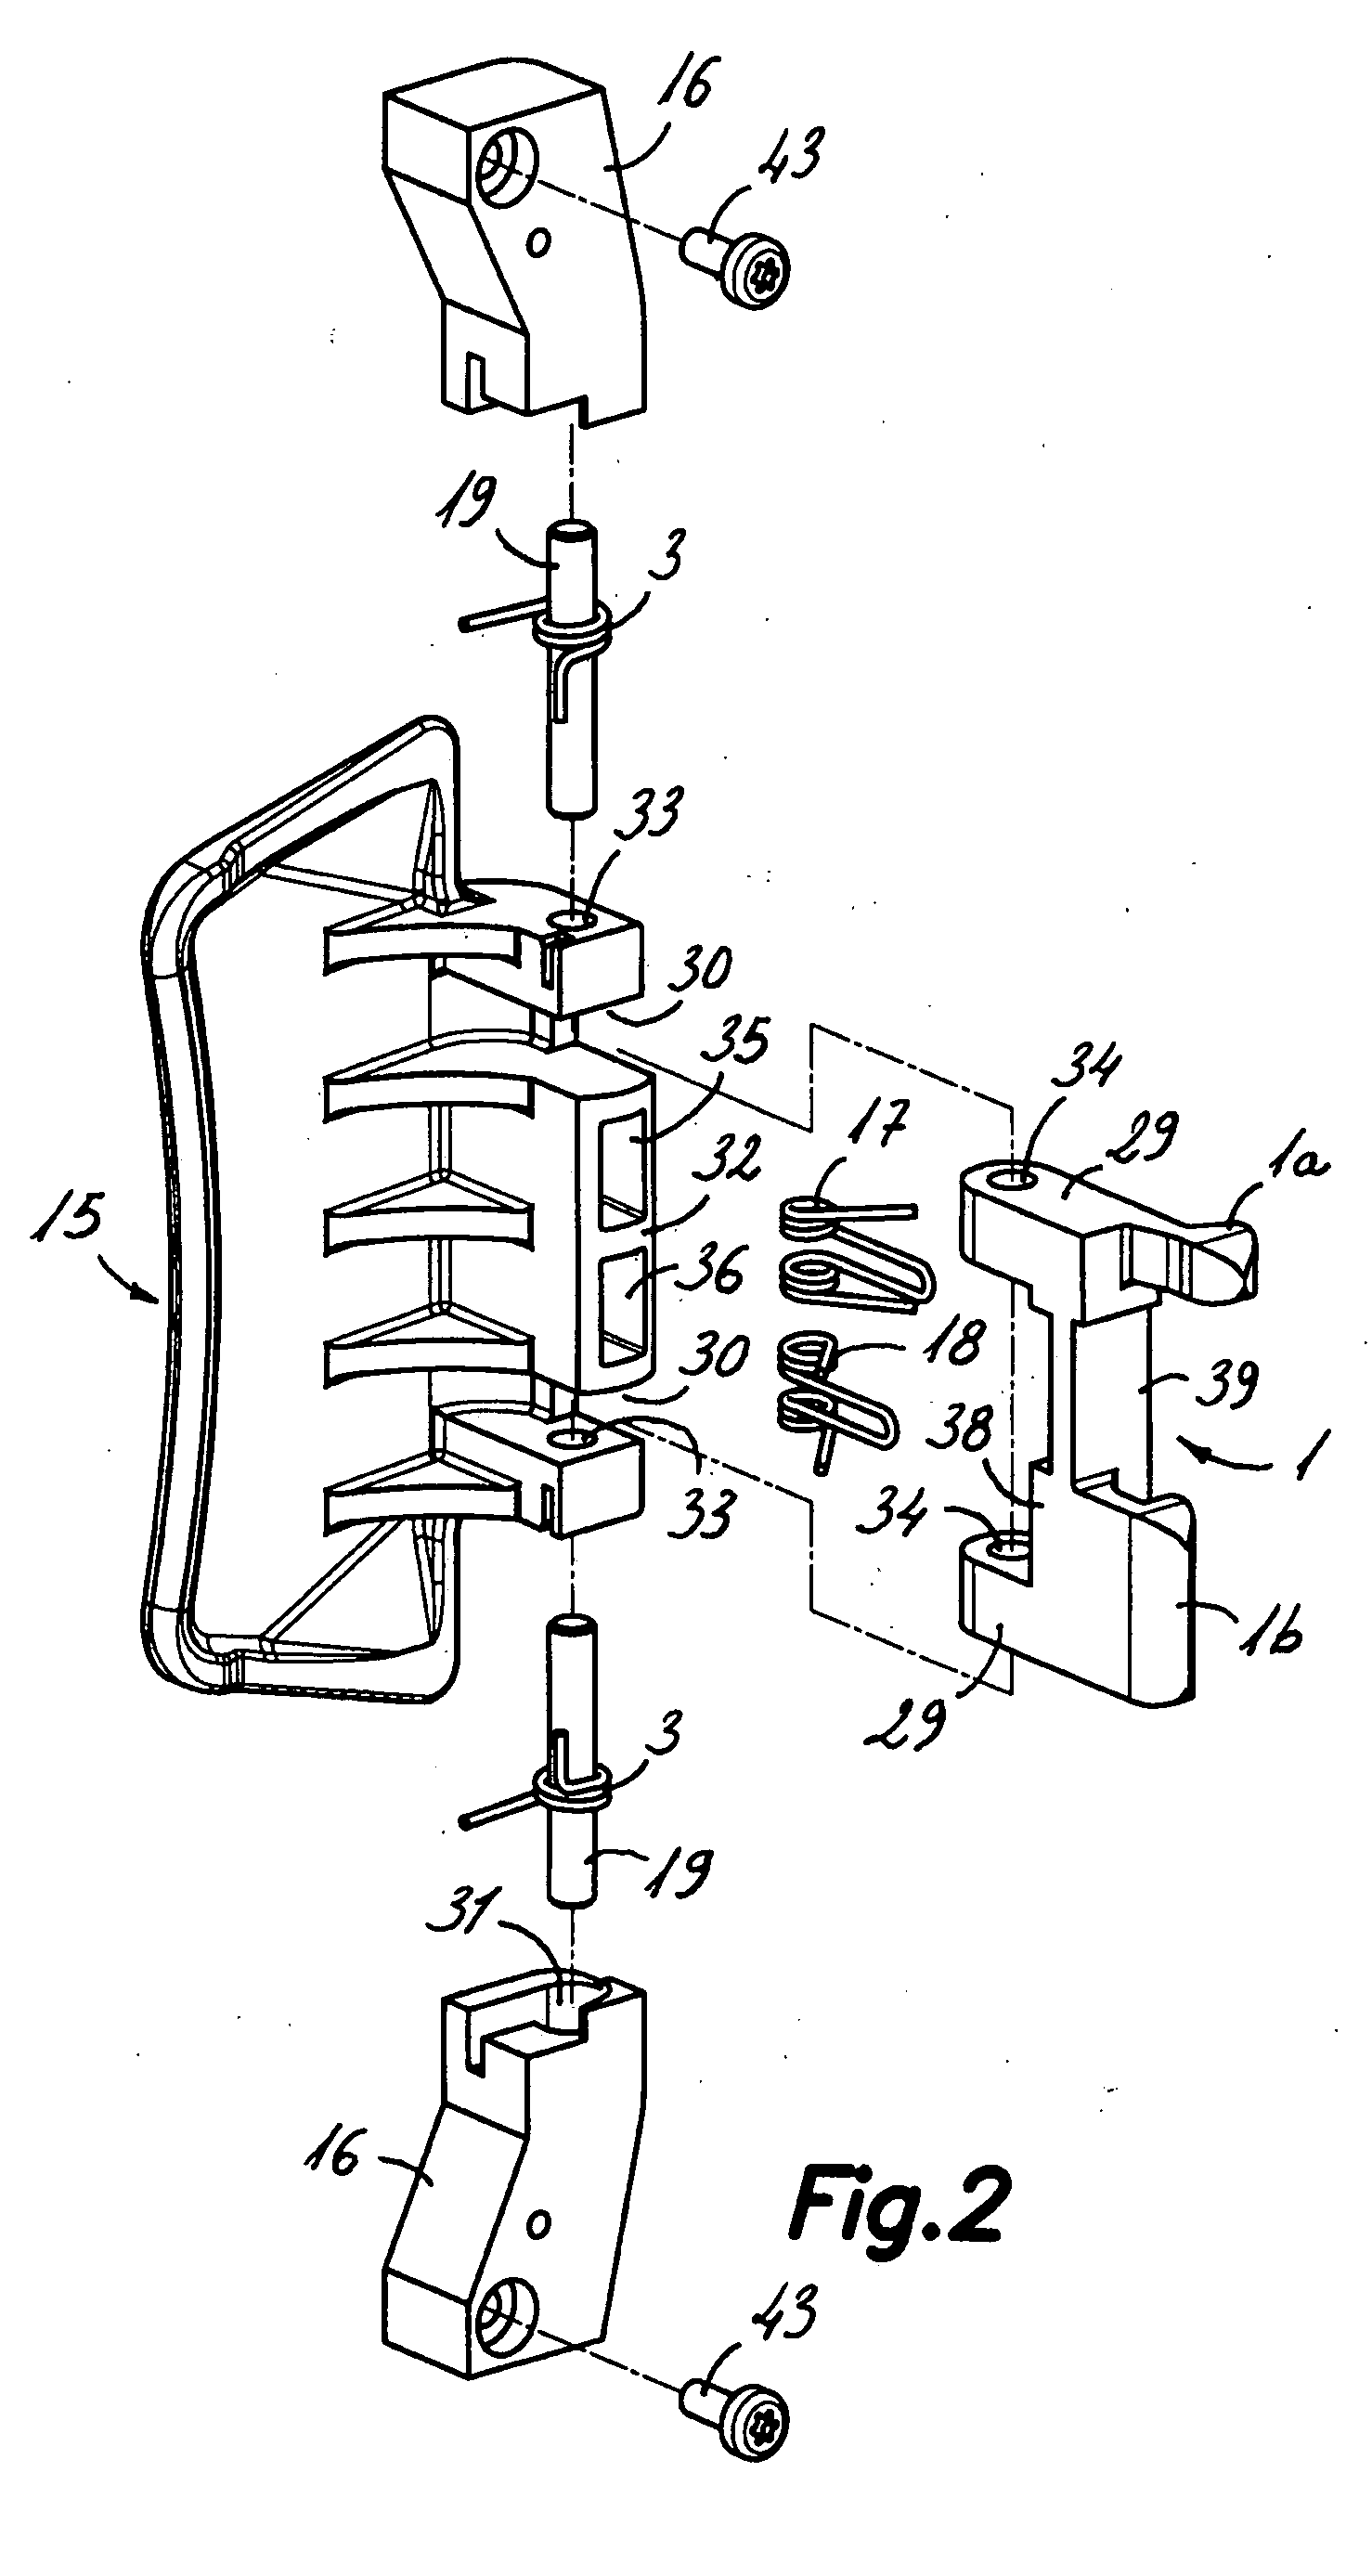 Locking device for the door of an apparatus comprising a rotary drum, and a latch for such device